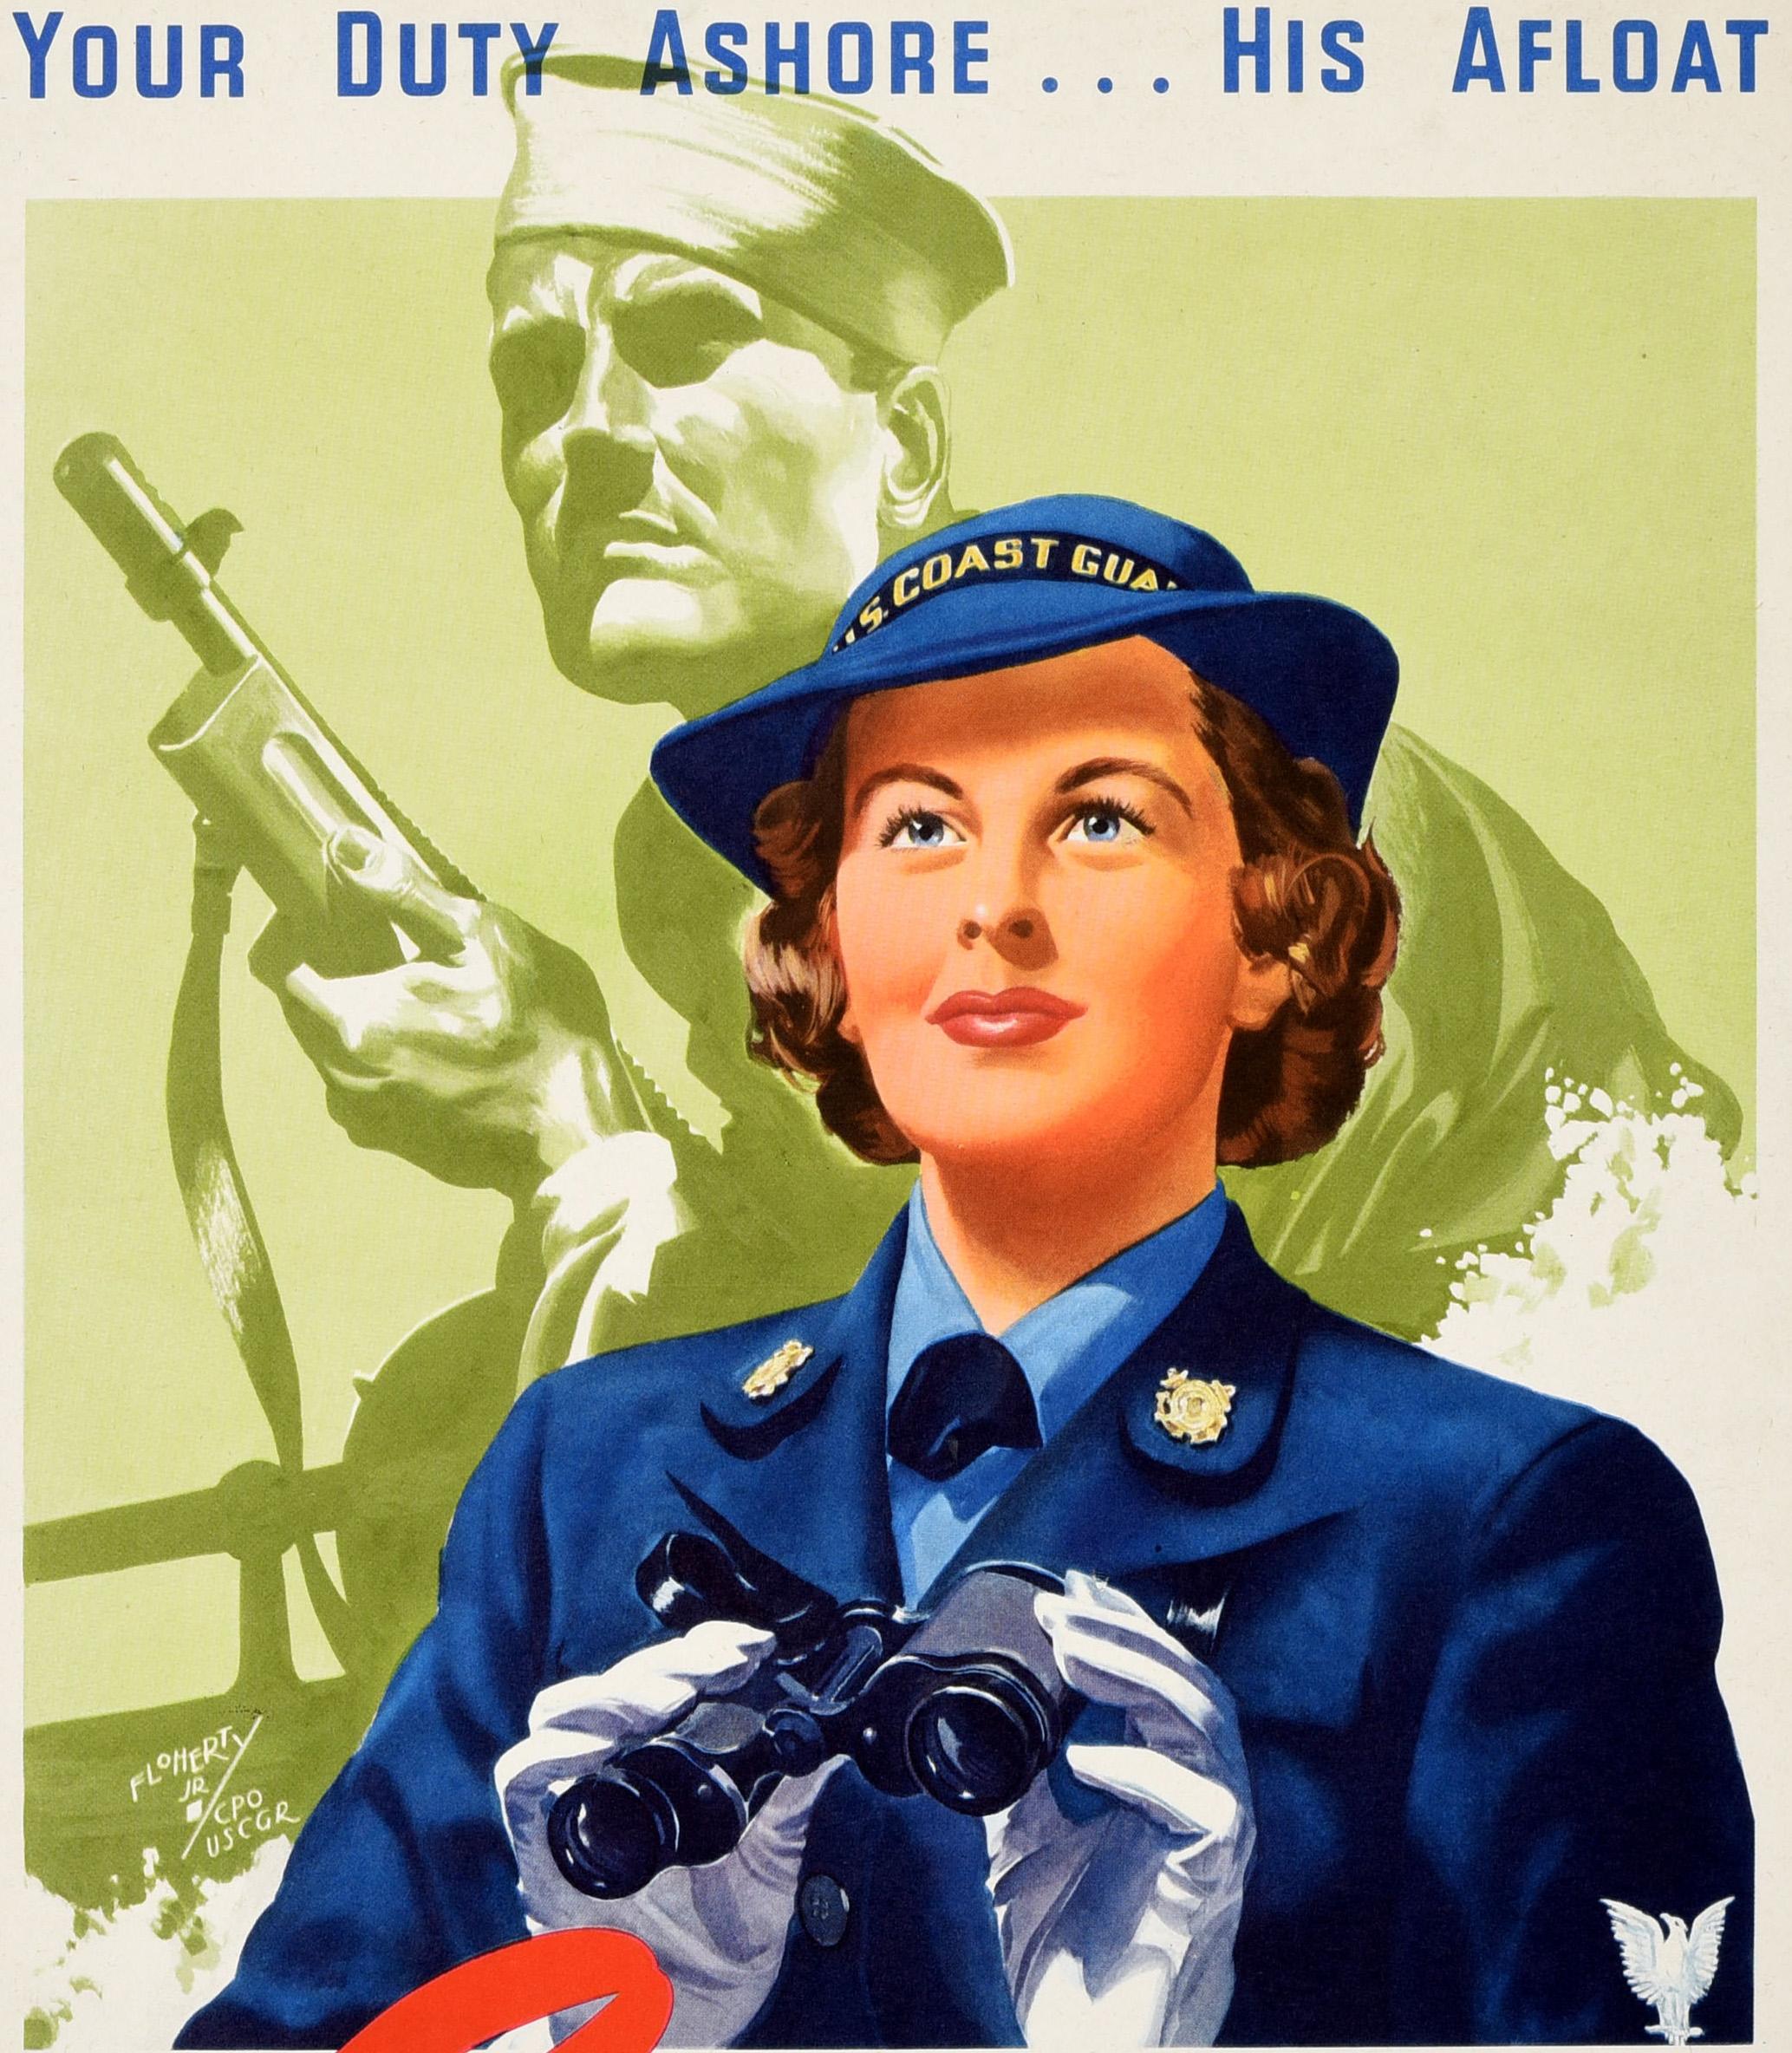 Original Vintage WWII Recruitment Poster SPARS Your Duty Ashore US Coast Guard - Print by Unknown